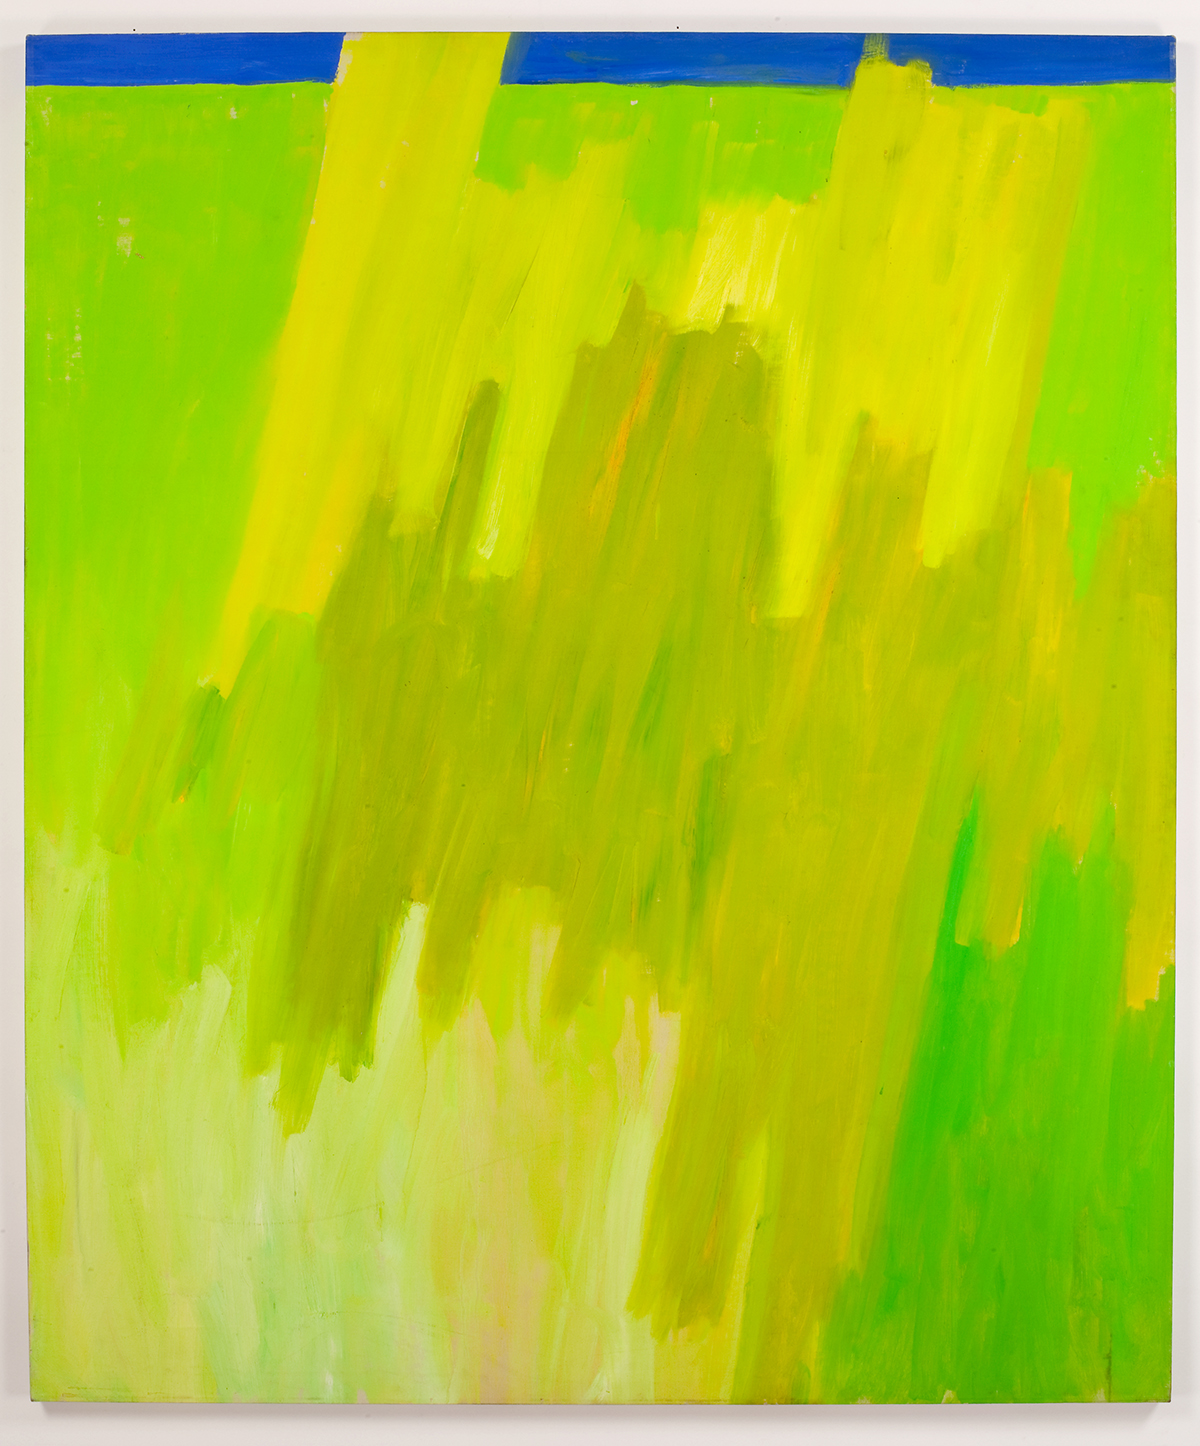 shades of green paint on a canvas